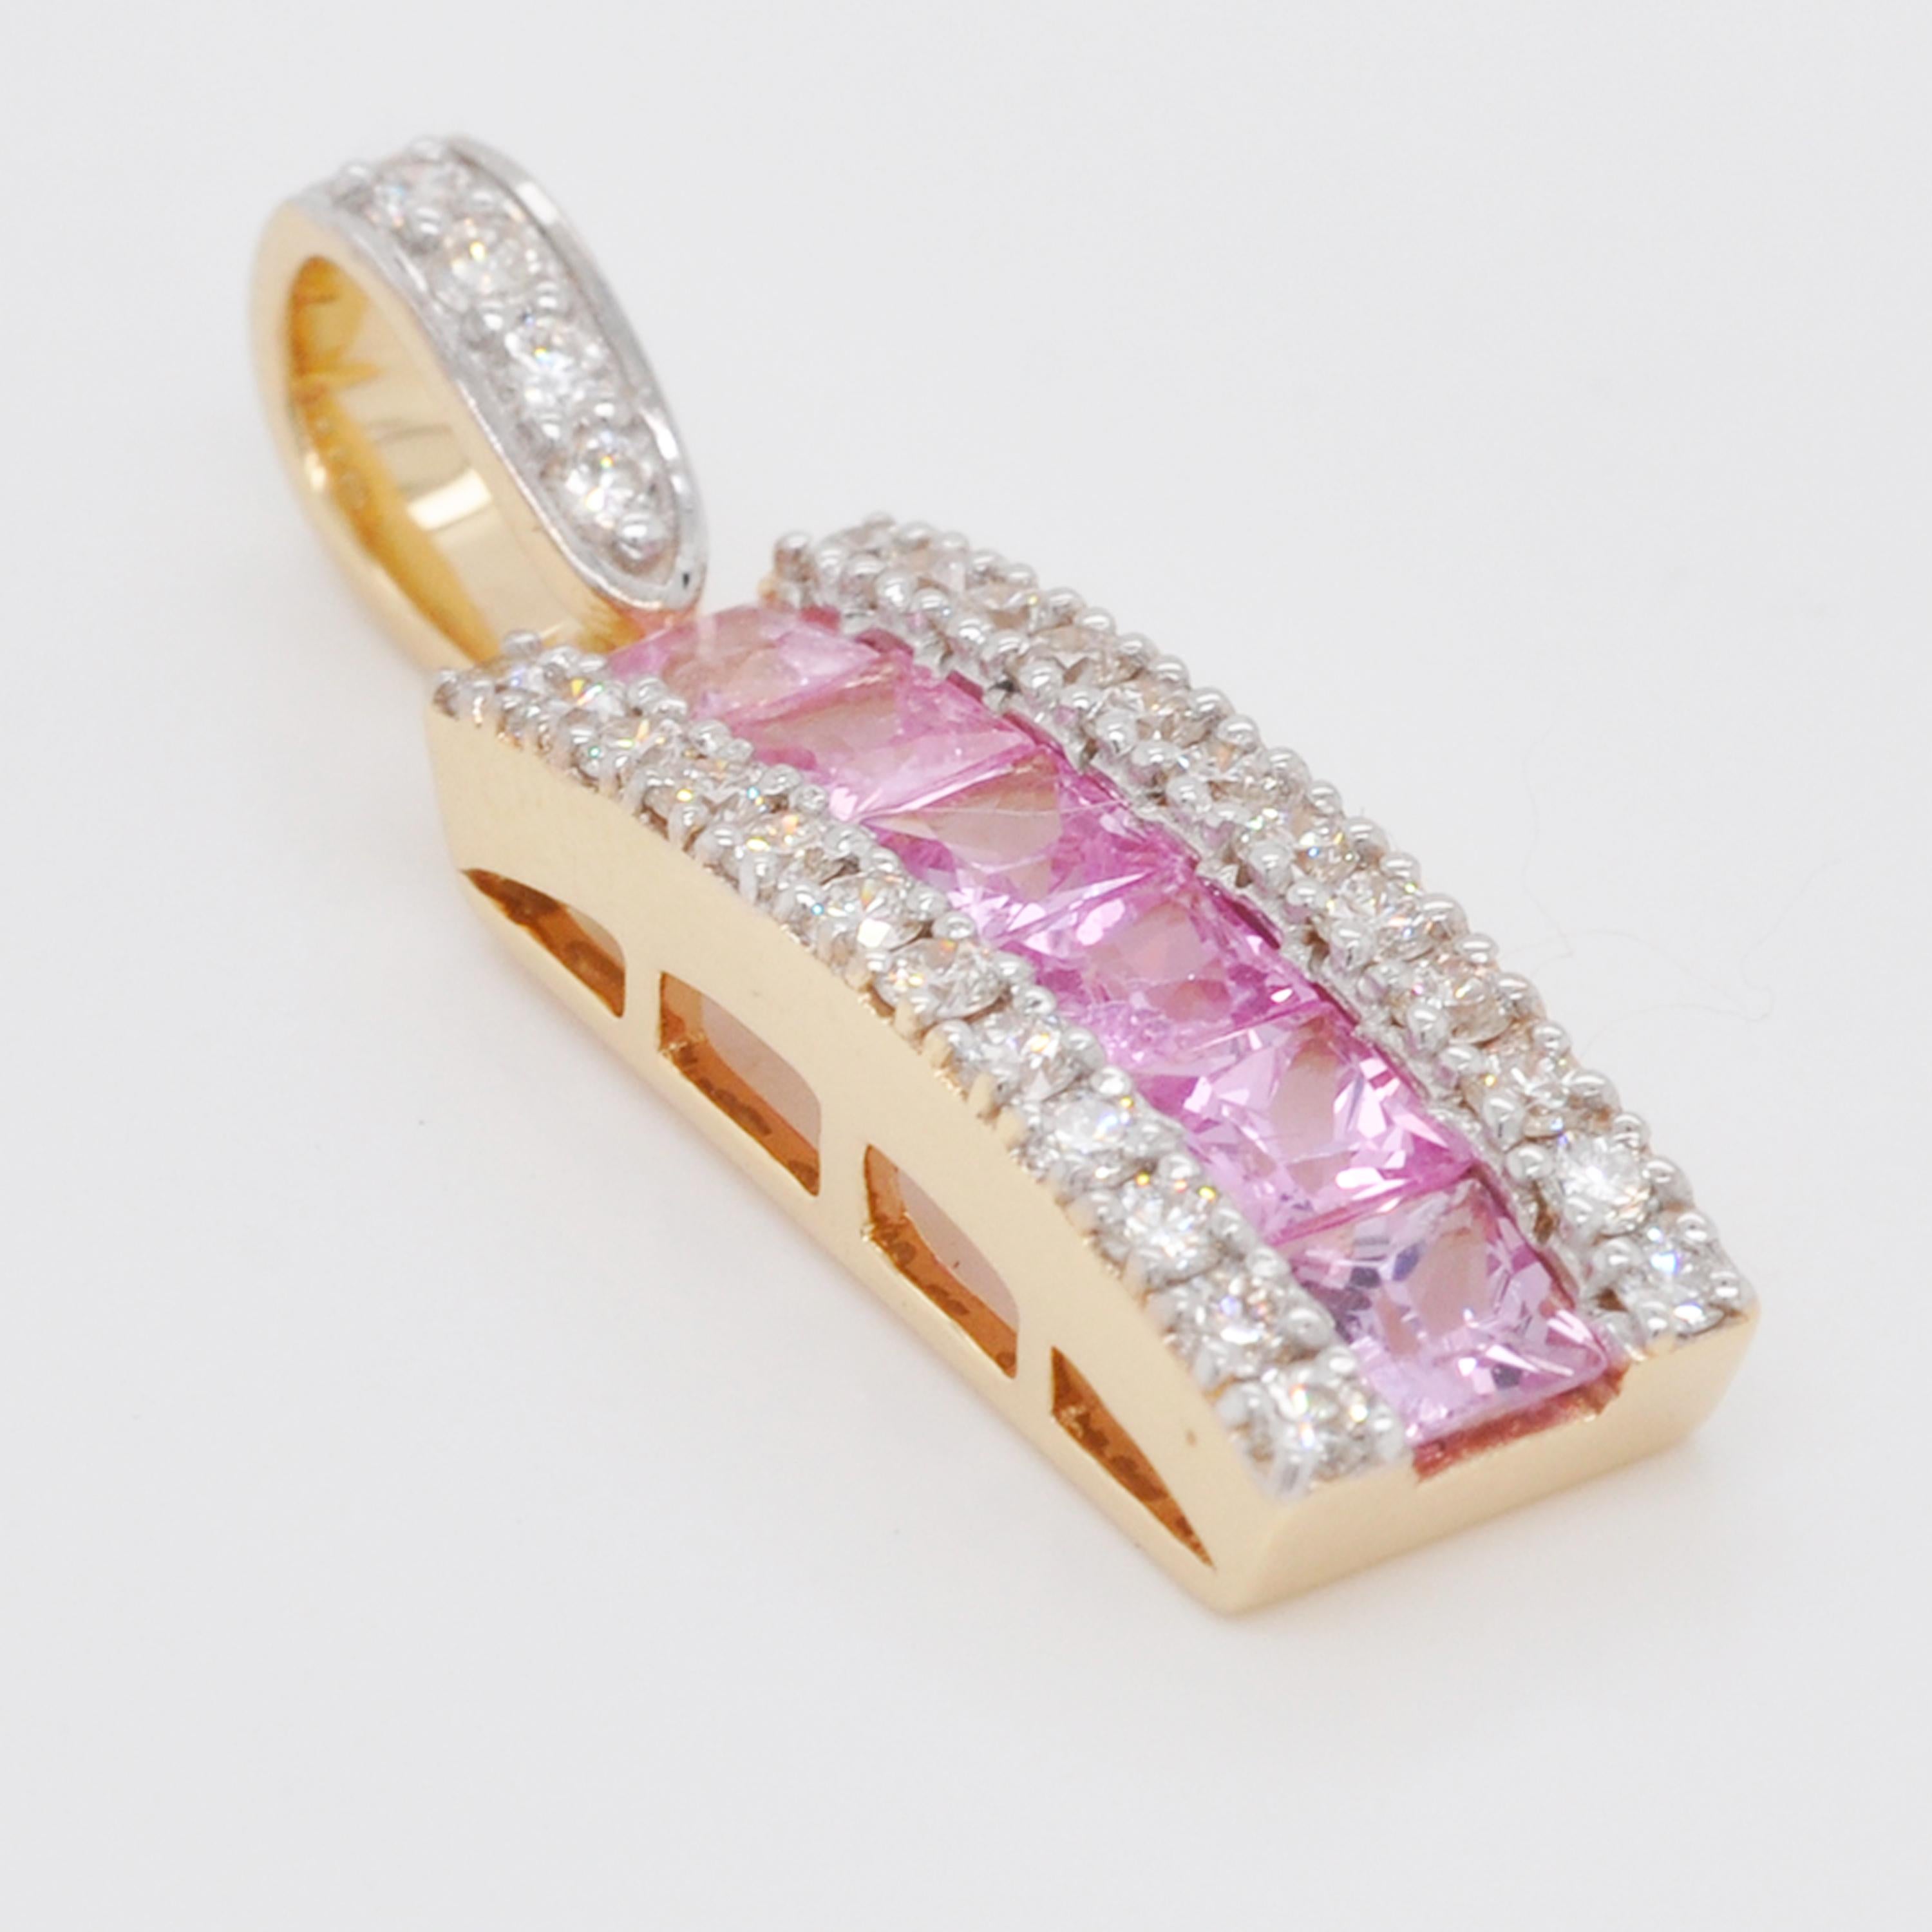 18 karat gold princess cut pink sapphire diamond pendant hoop earrings ring set.

This beautiful linear set of matching pendant, hoop earrings and the ring with lustrous pink sapphires is extremely spectacular. Elegance and chic in one, this set